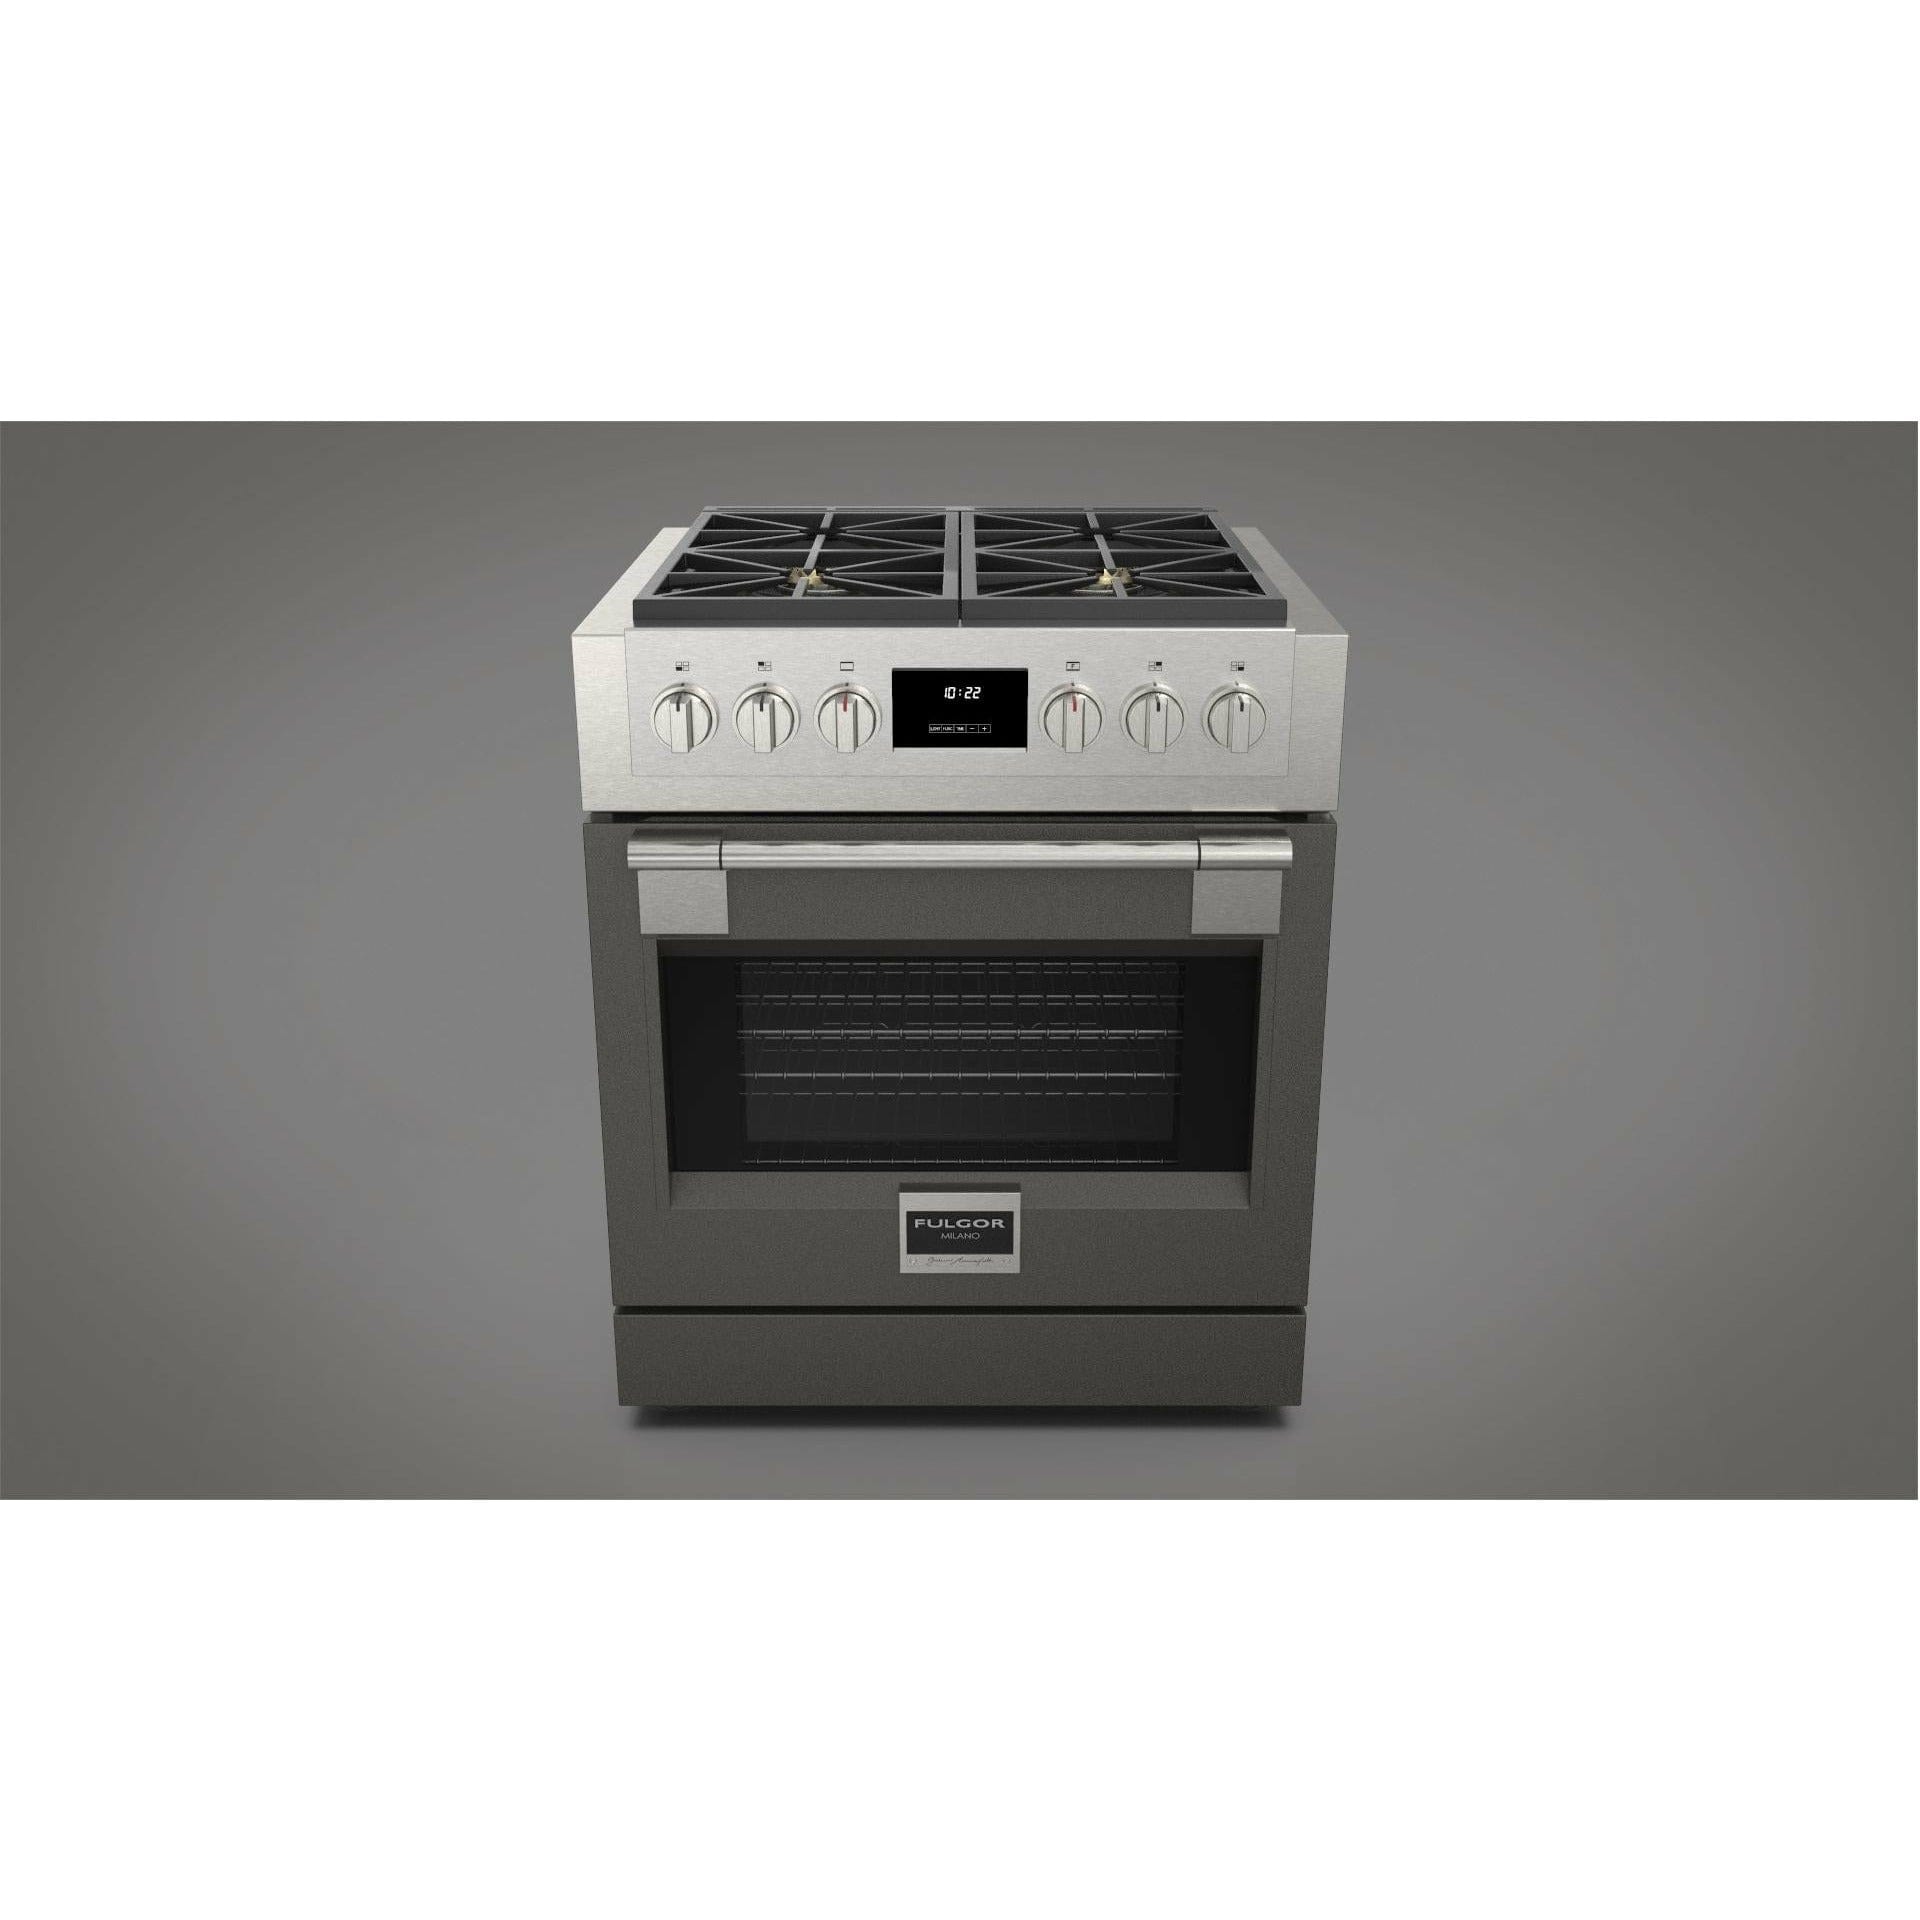 Fulgor Milano 30" Professional All Gas Range with 4 Dual-Flame Burners, 4.4 cu. ft. Capacity w/ Stainless Steel - F6PGR304S2 Ranges PDRKIT30MG Luxury Appliances Direct